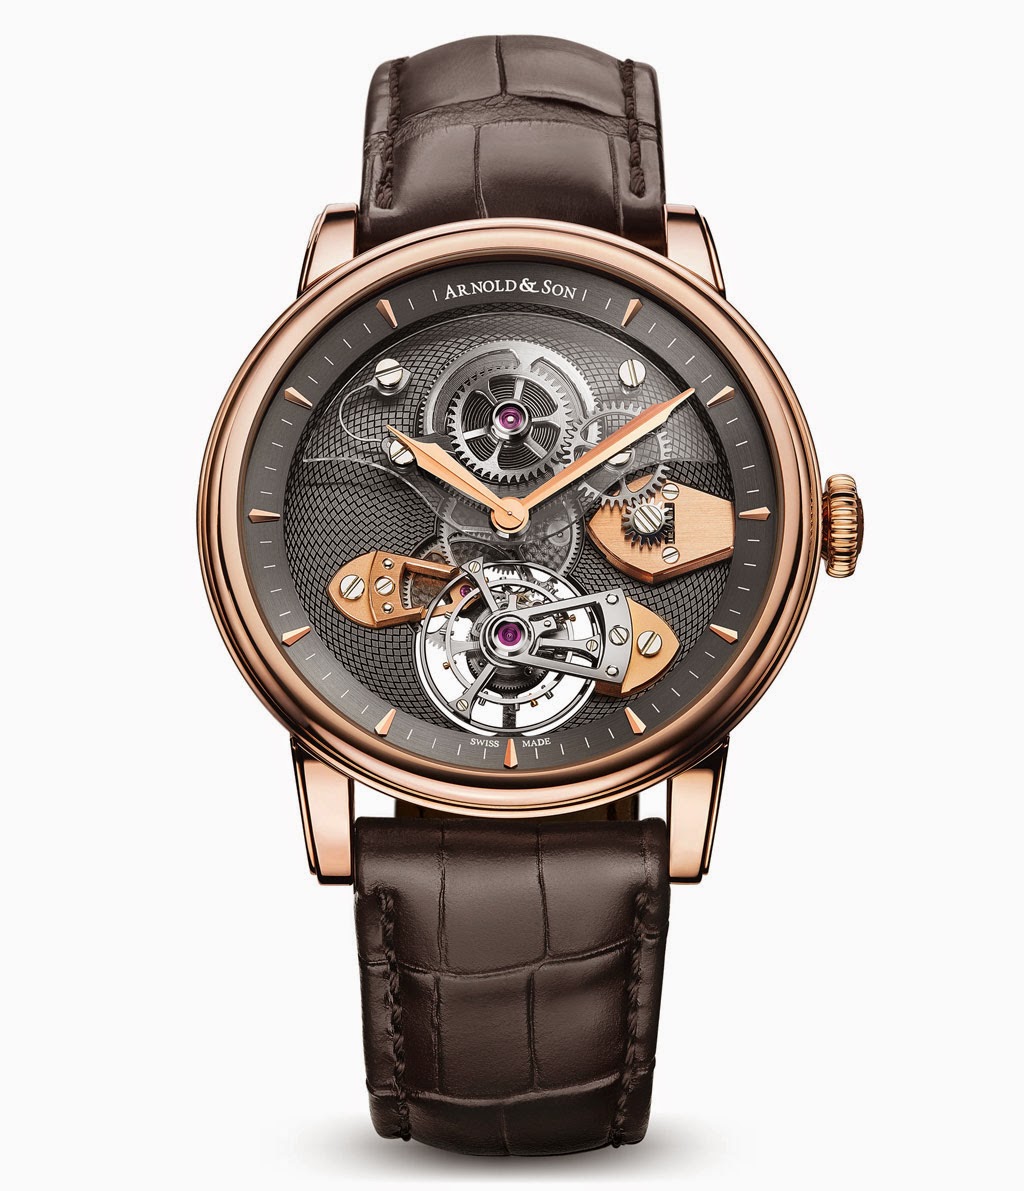 Arnold & Son - Royal TES Tourbillon | Time and Watches | The watch blog